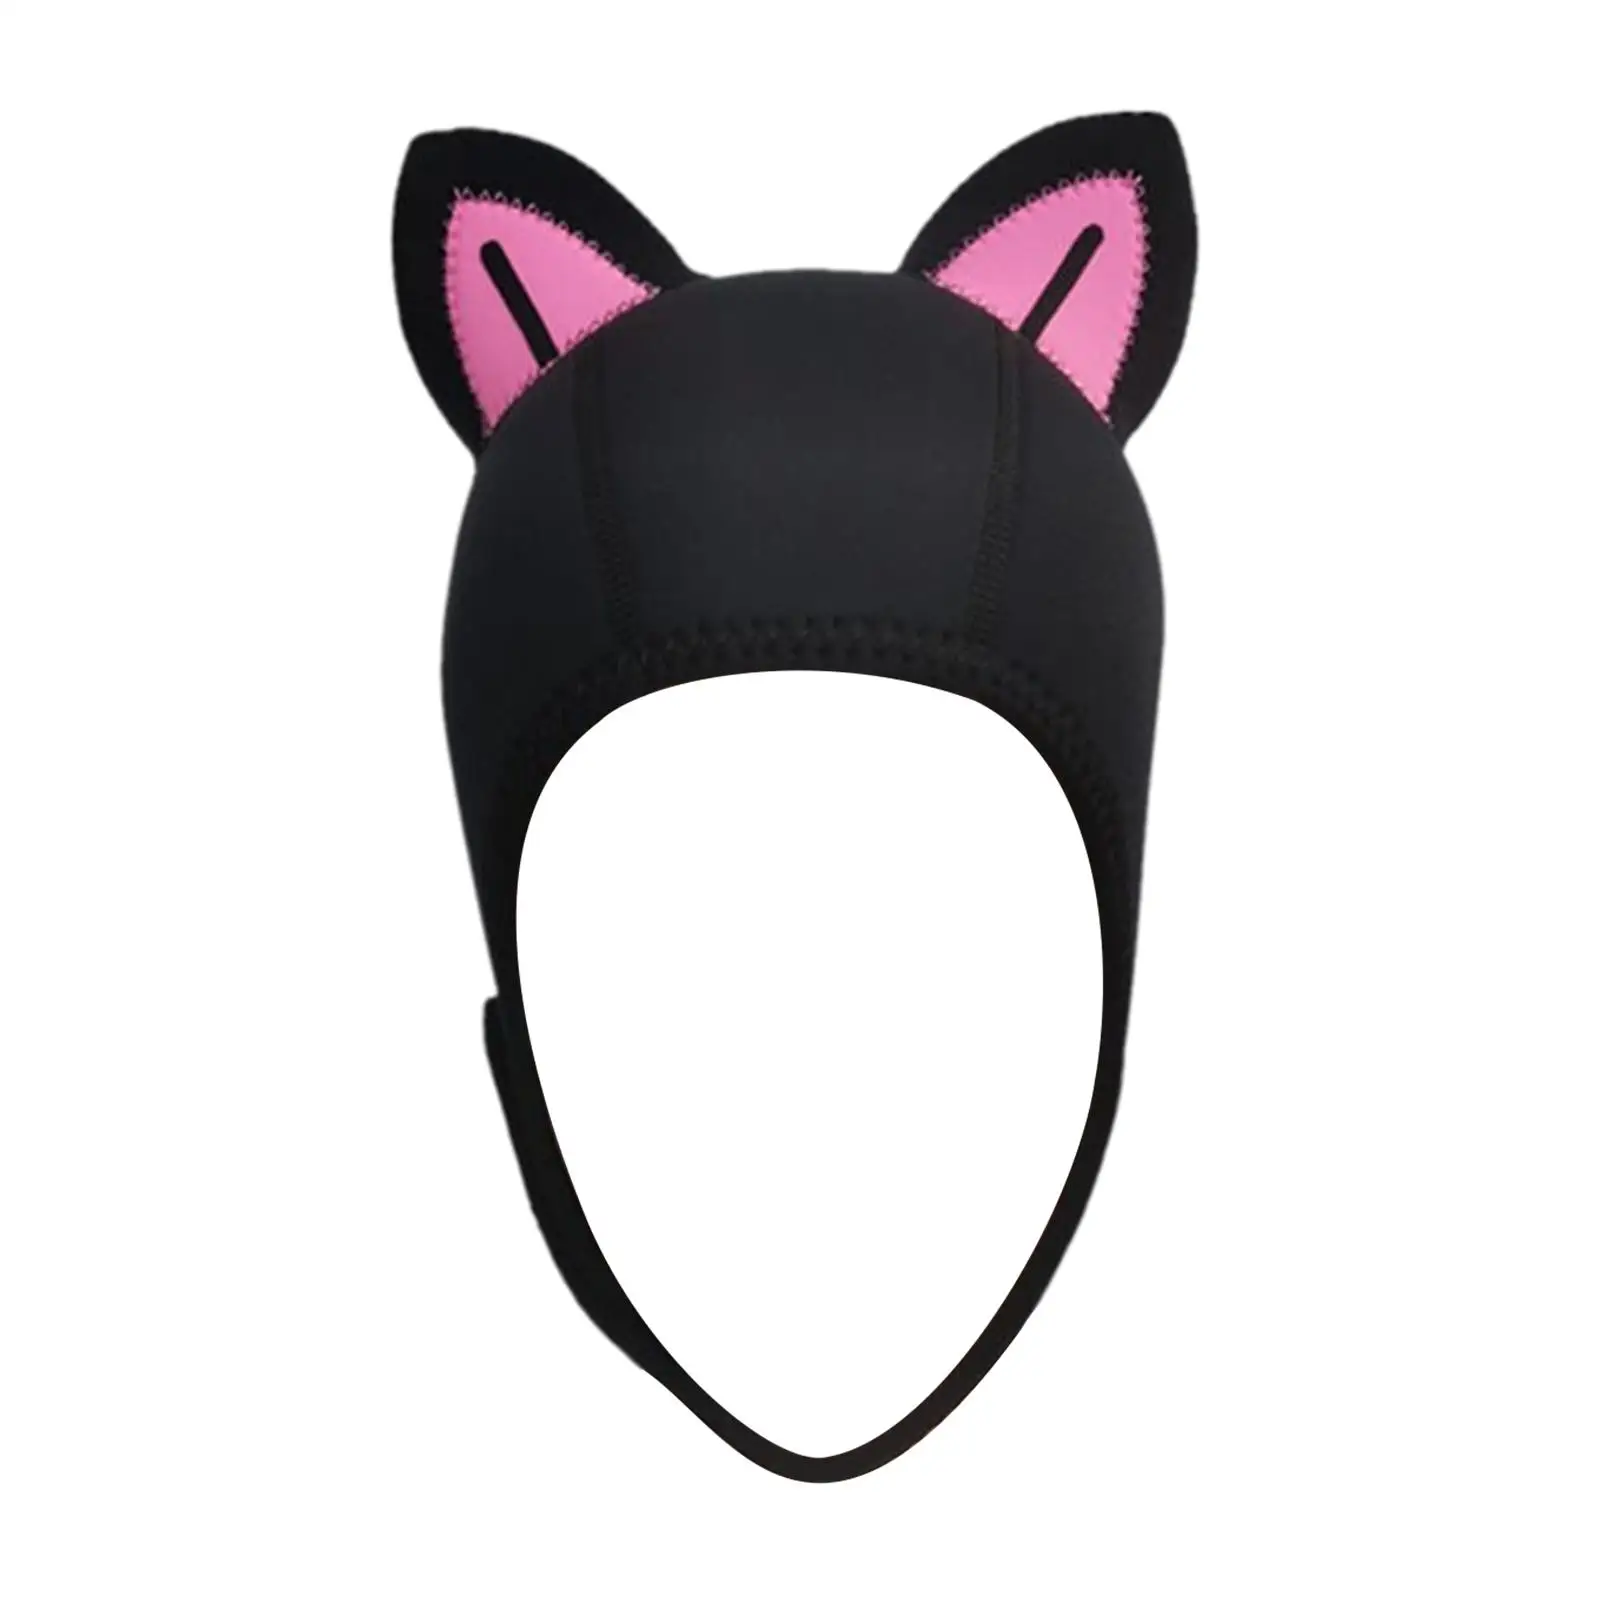 Cat Ears Wetsuit Hood Hat for Women Kids with Air Vent Accessories Convenient to Wear and Take Off